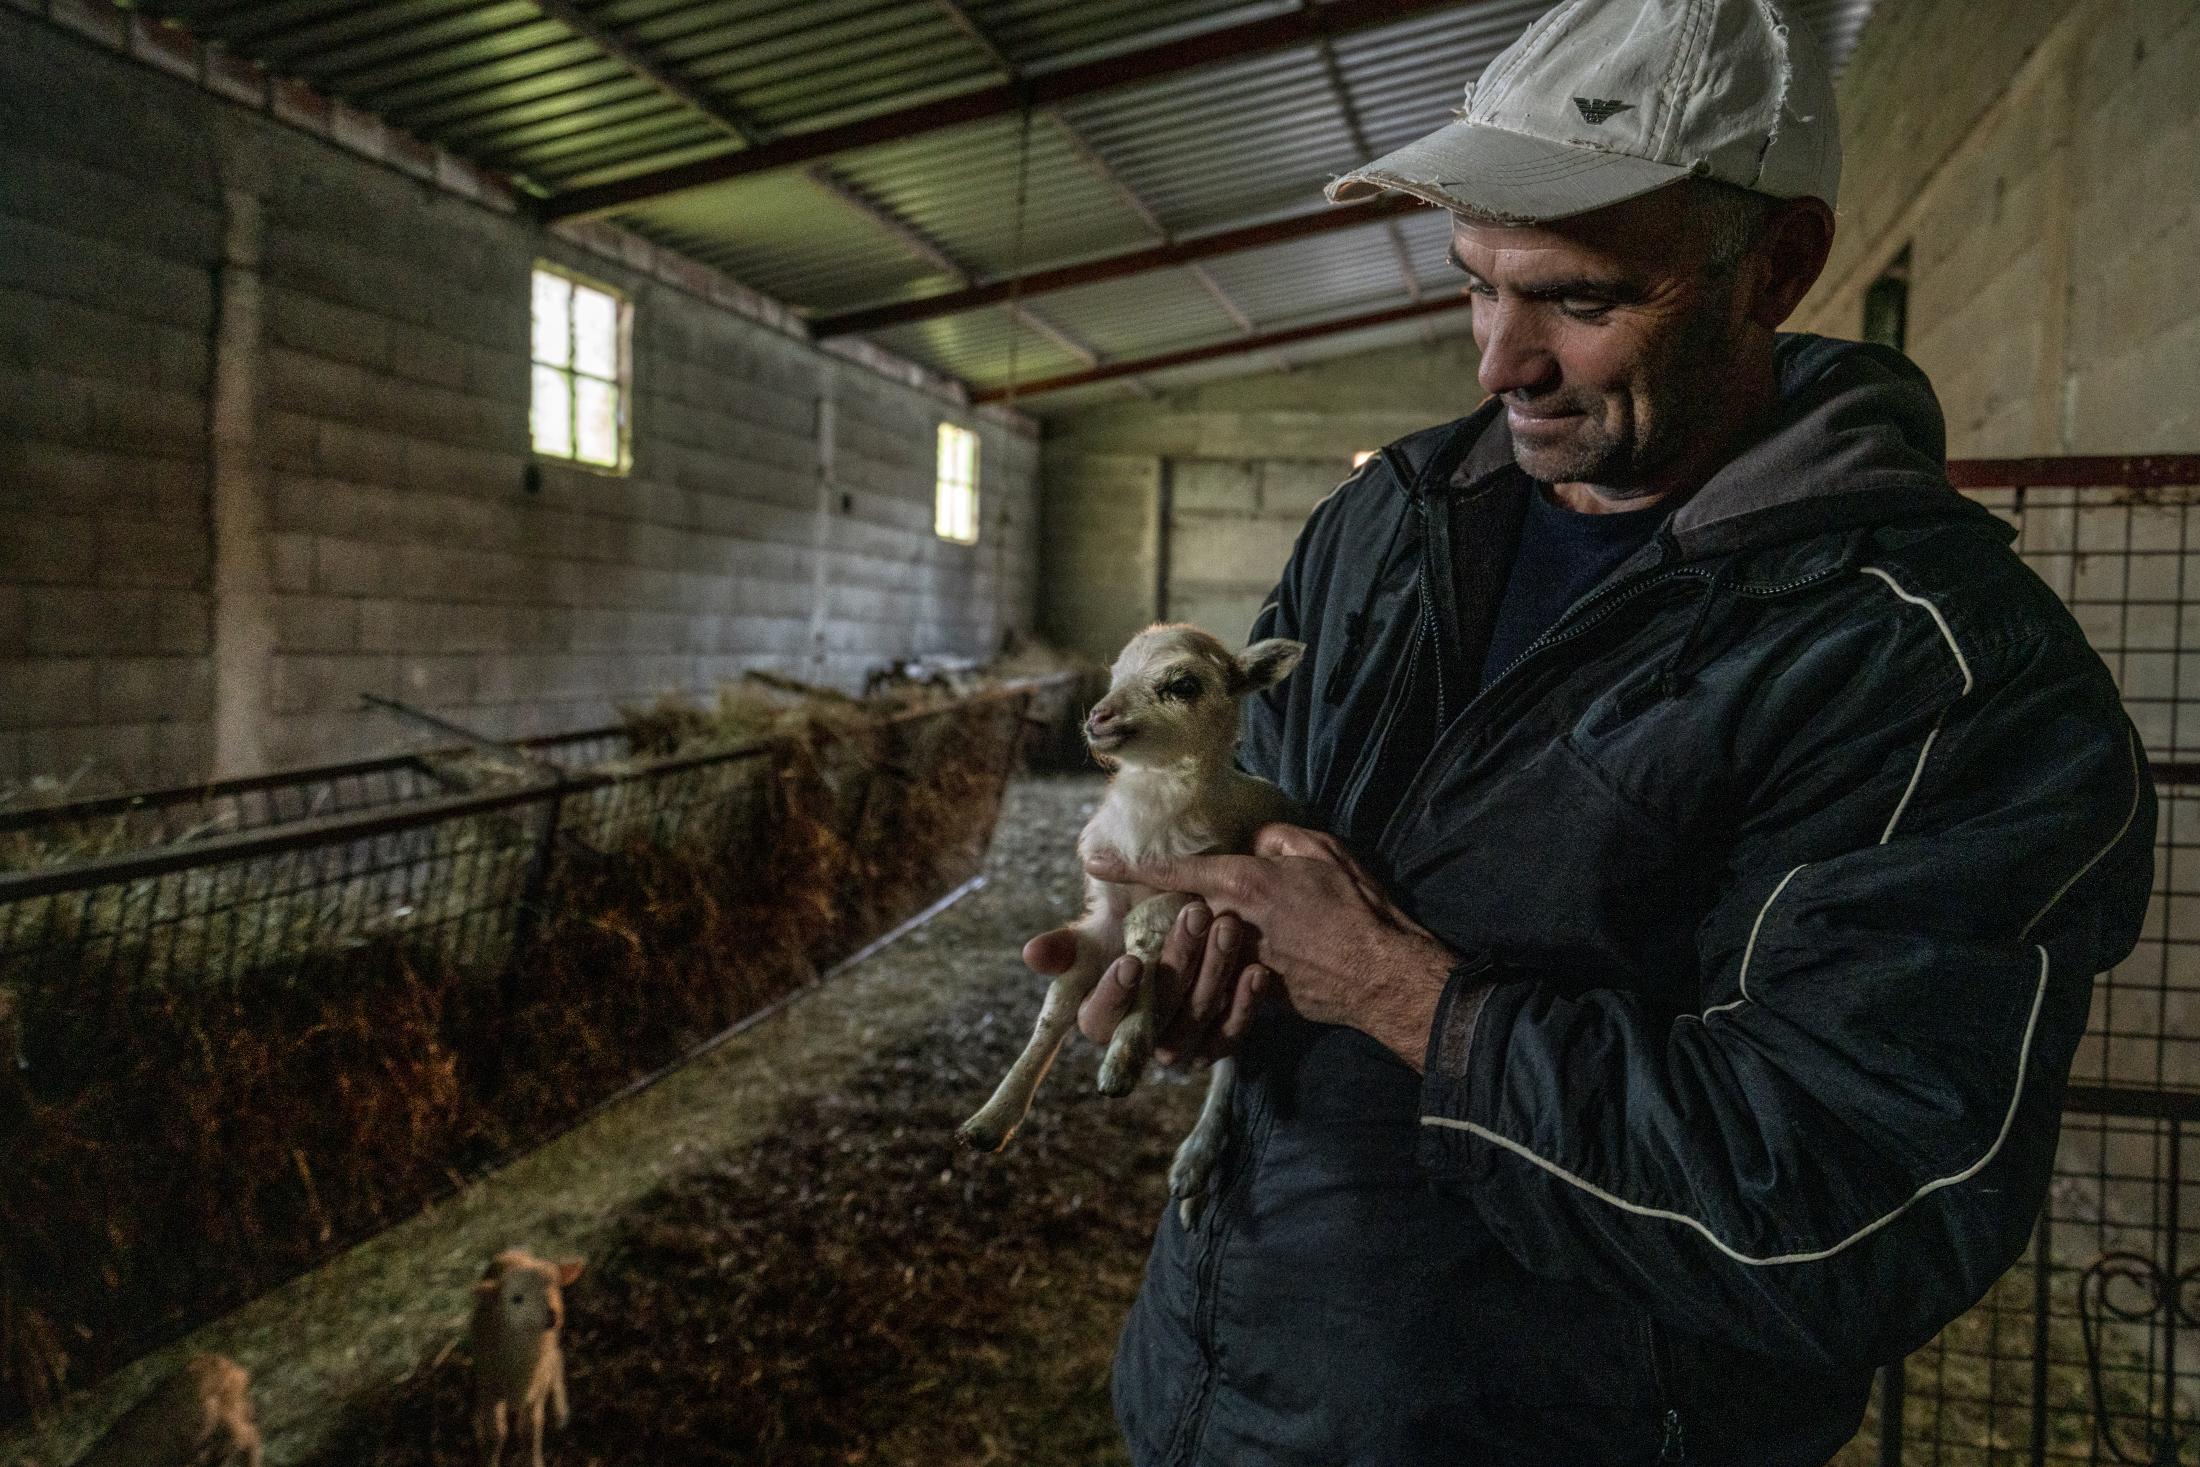 Barroso: An Ancient Farming Culture in Northern Portugal Becomes a World Heritage - Paulo Pires holds a newborn dwarf lamb at his barn in...